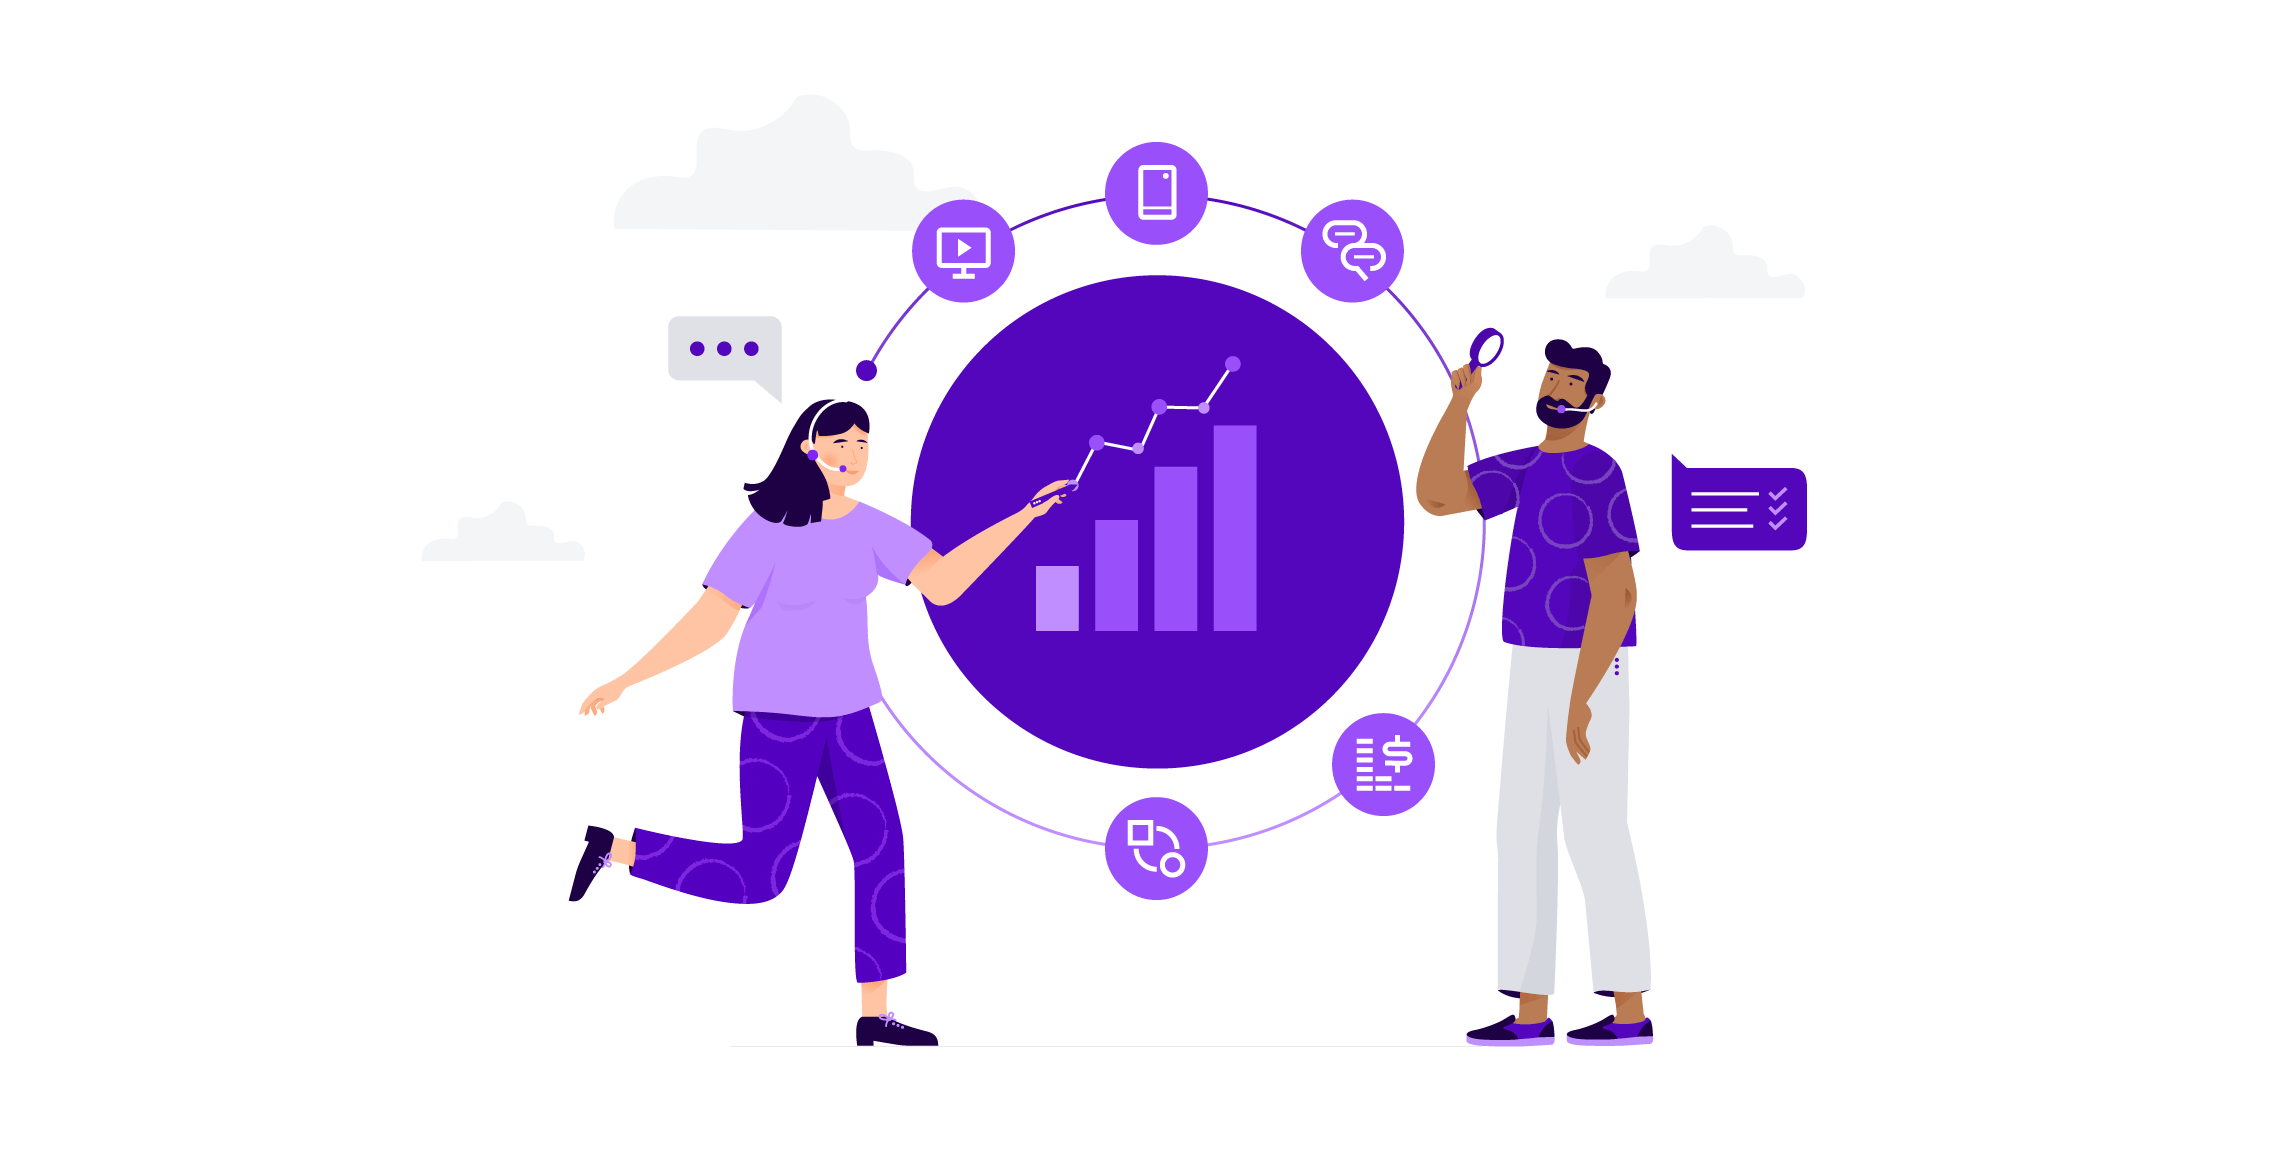 Woman and man pointing to a circle with icons for UCaaS channels pointing to a rising bar graph